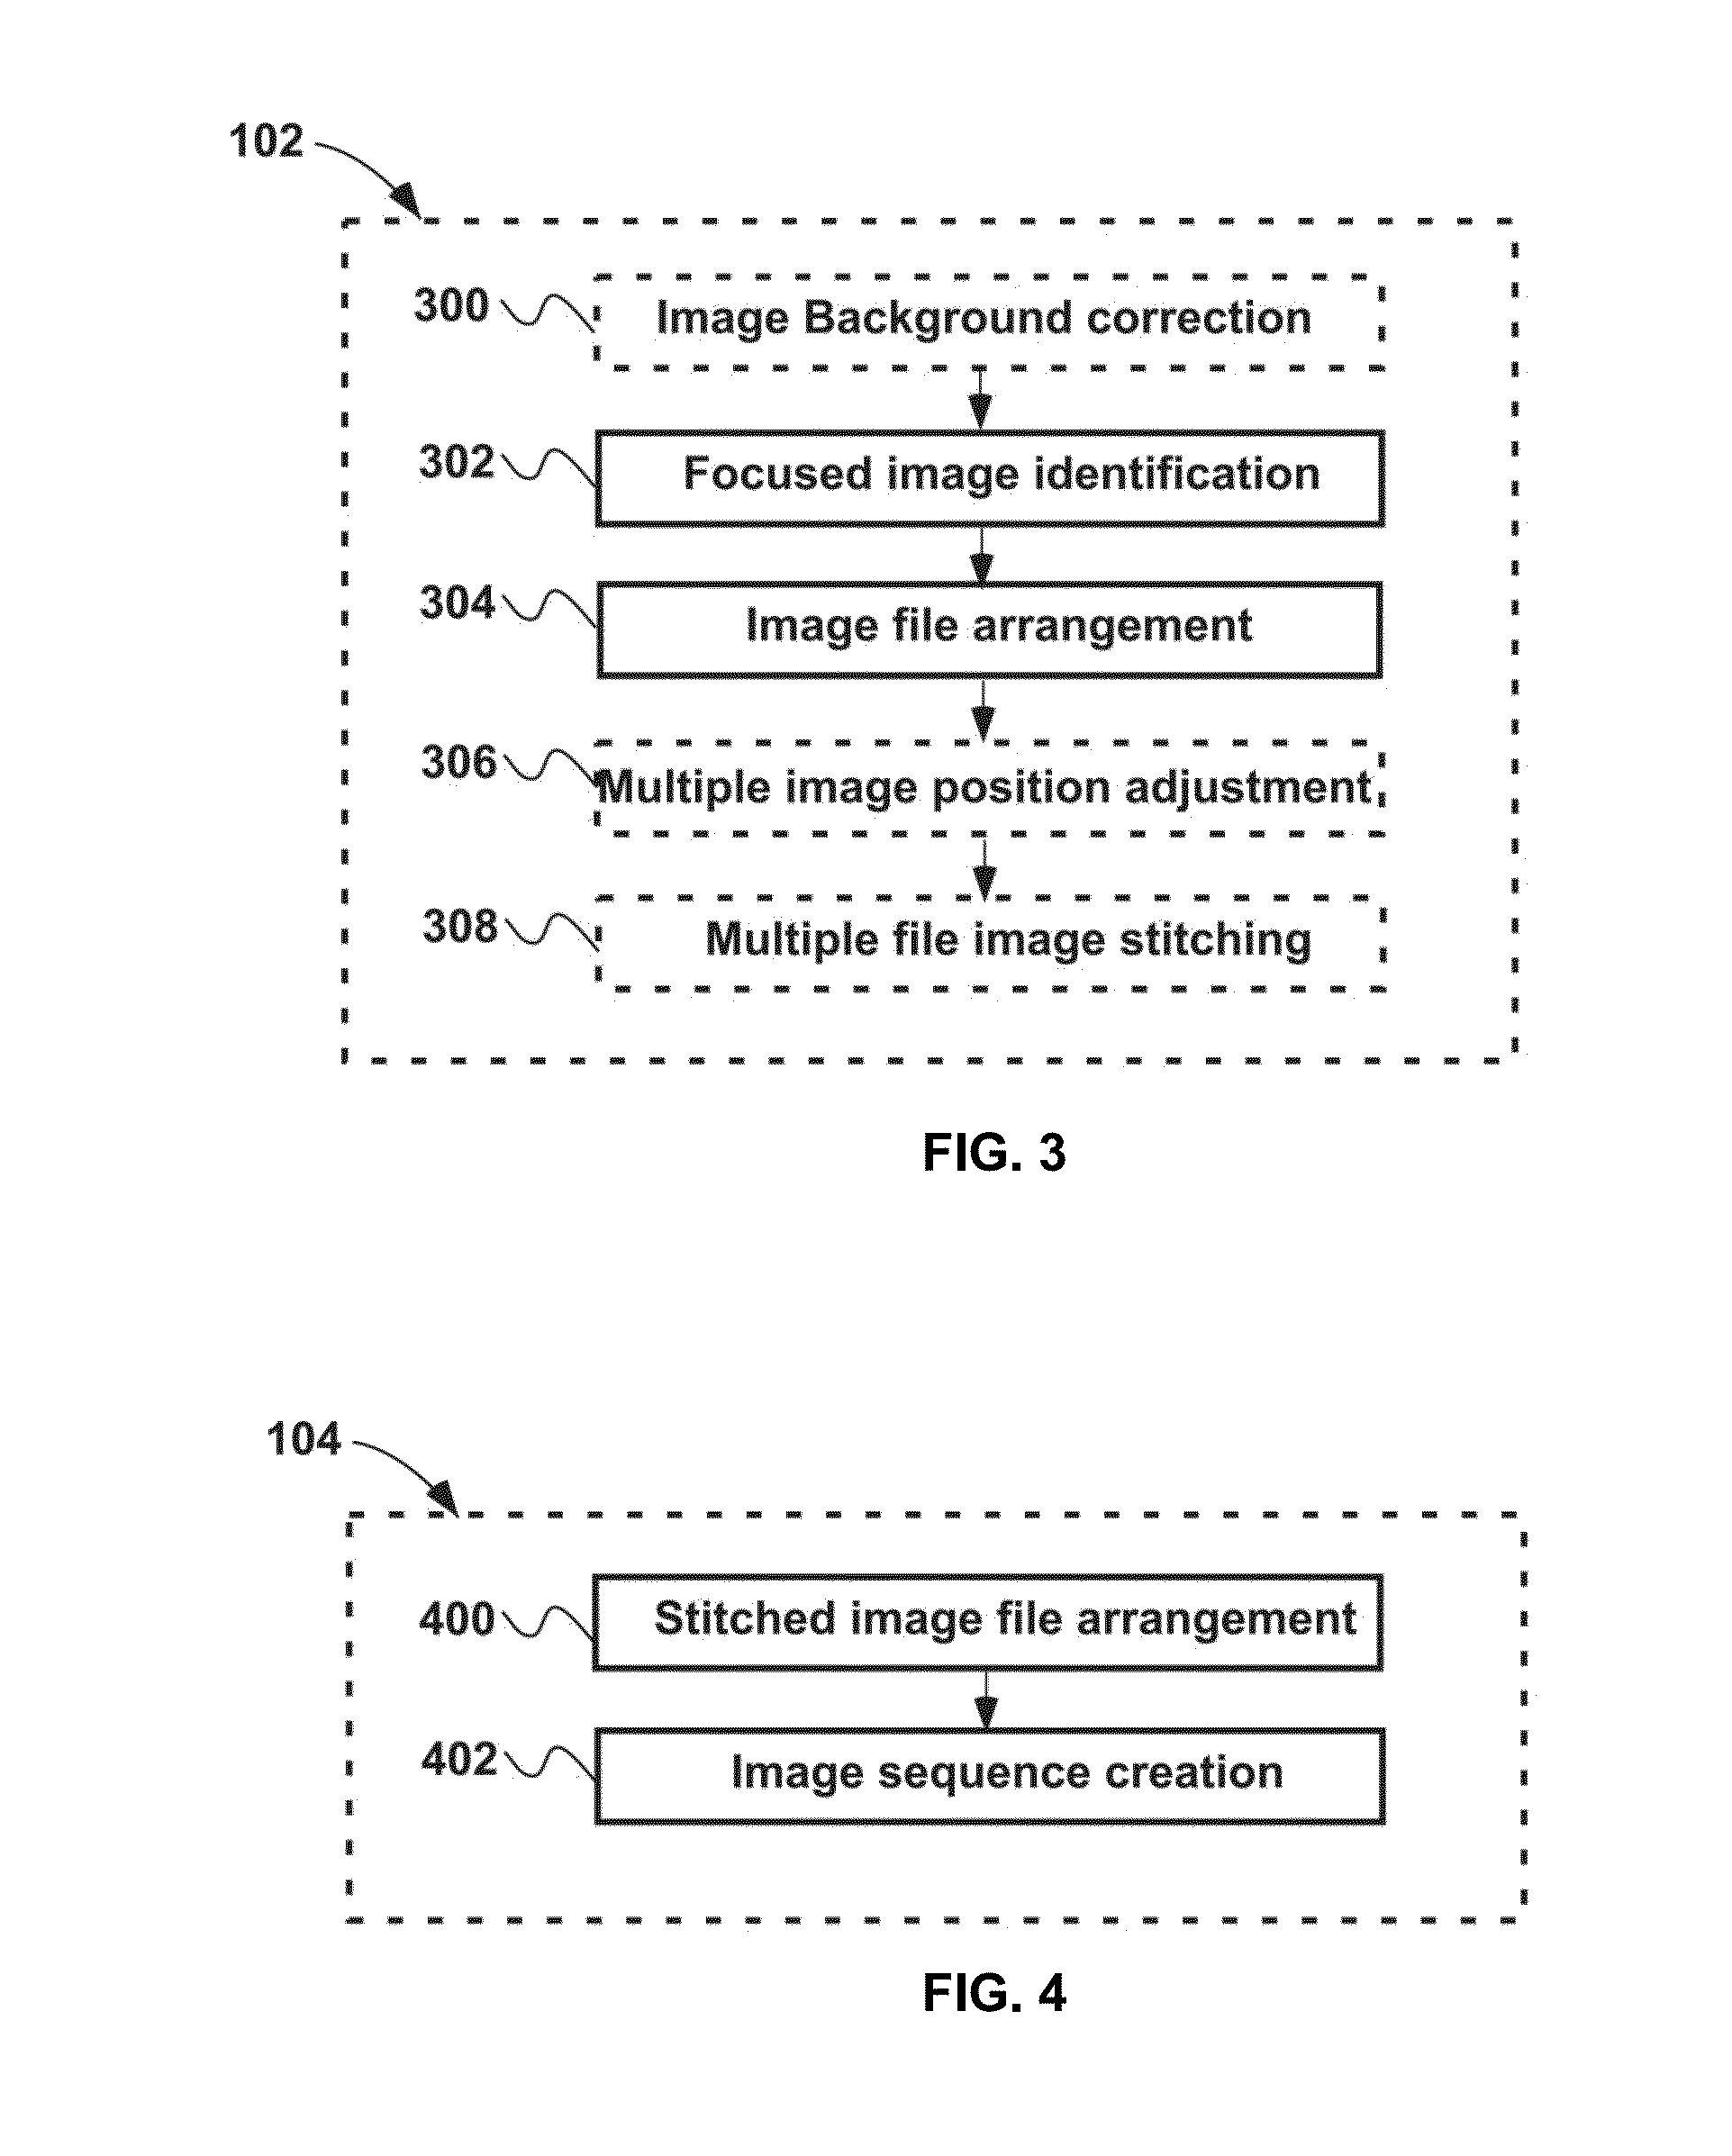 Apparatus for Systematic Single Cell Tracking of Distinctive Cellular Events